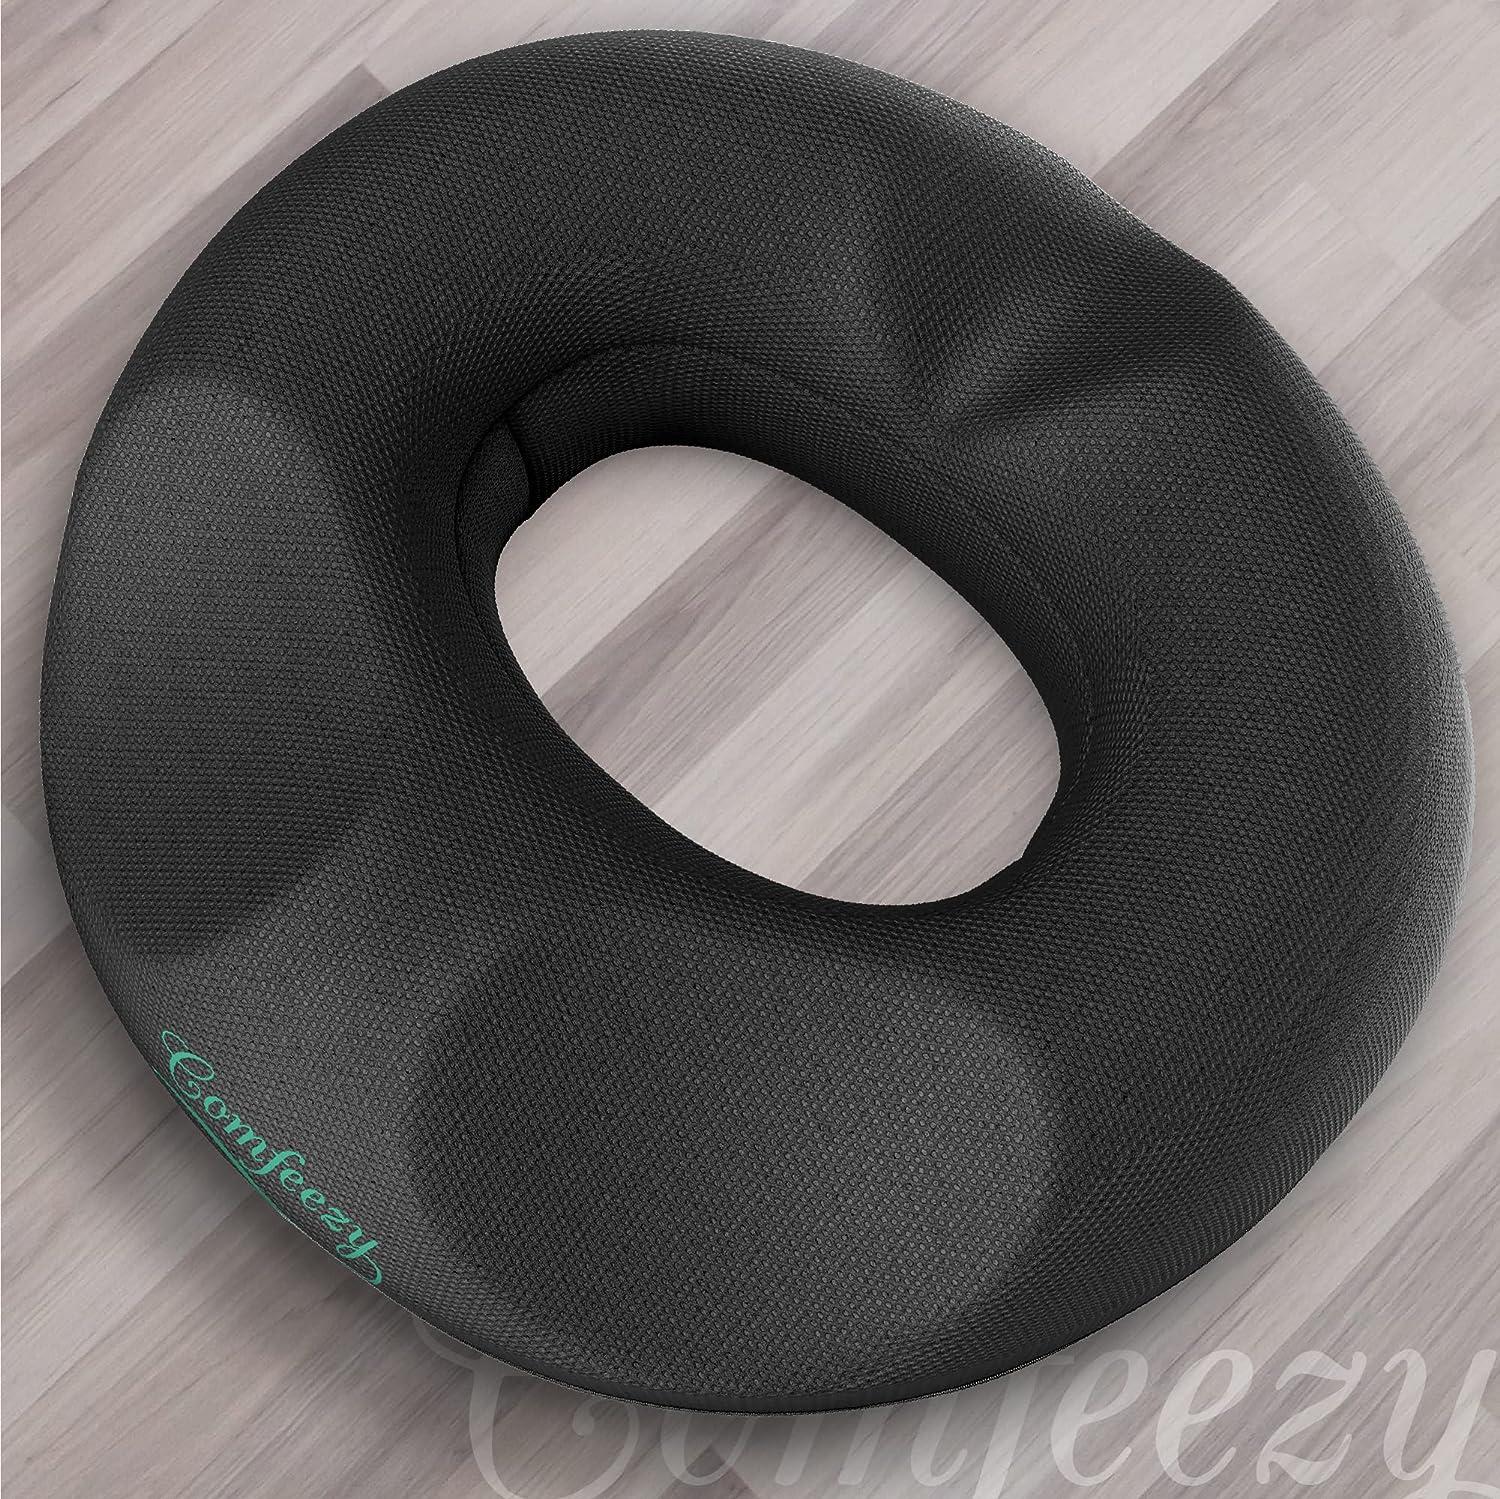 Patented Design Donut Pillow Tailbone Hemorrhoid for Support Pain